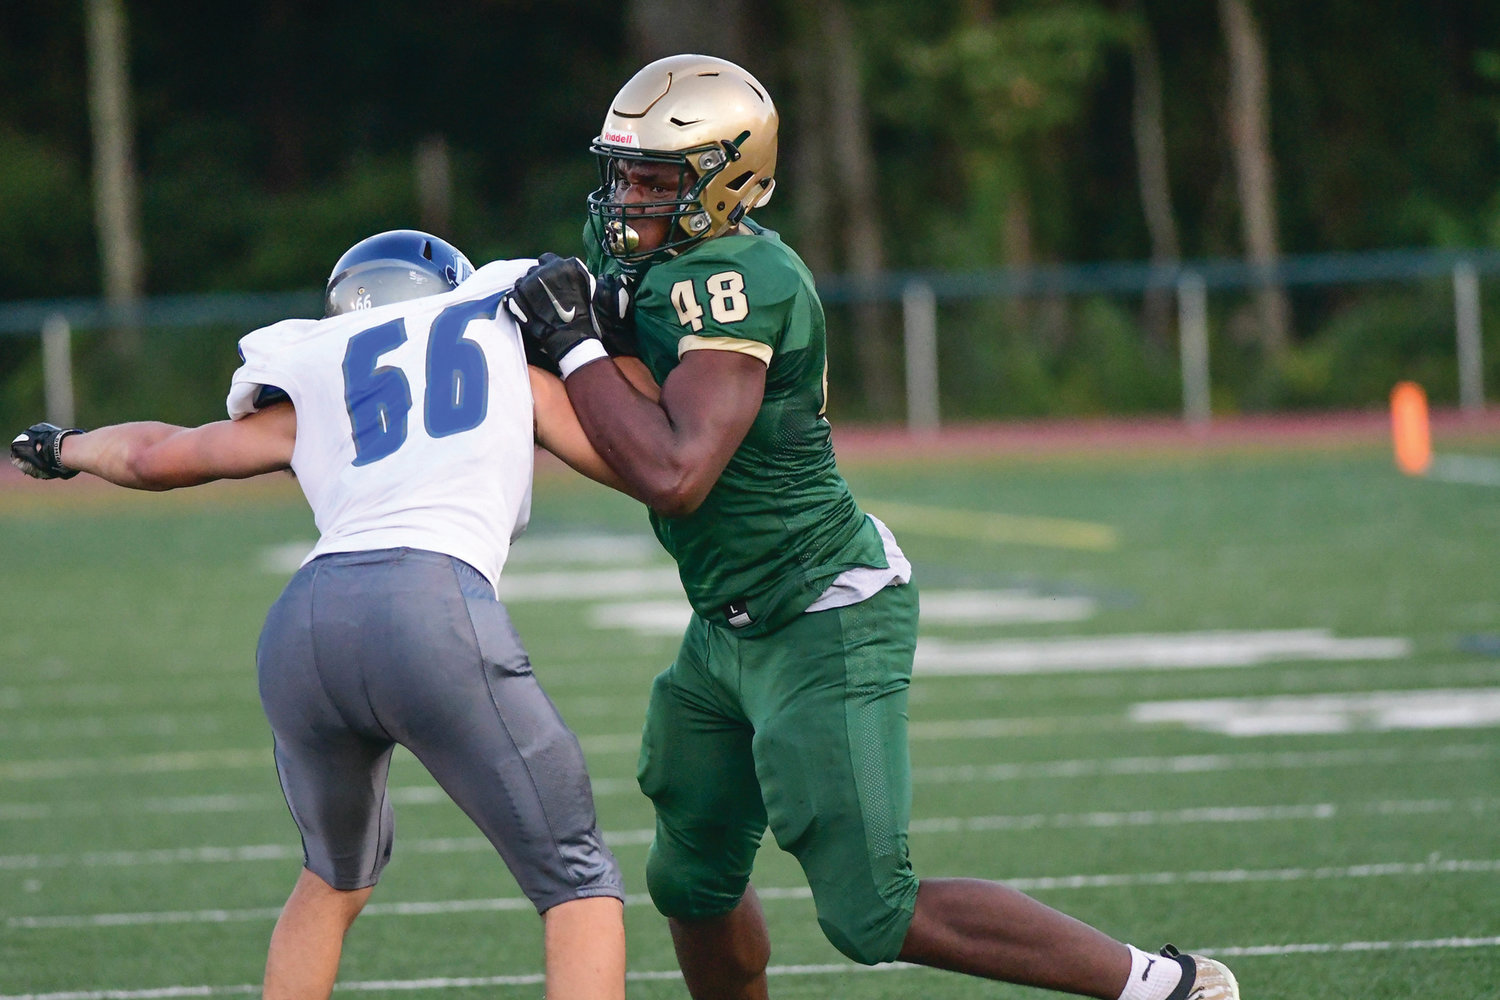 MAKING MOVES: Hendricken’s Jason Onye sheds a block during a game last season. Onye has verbally committed
to play for Notre Dame starting in 2021, citing the university’s similarities with Hendricken.